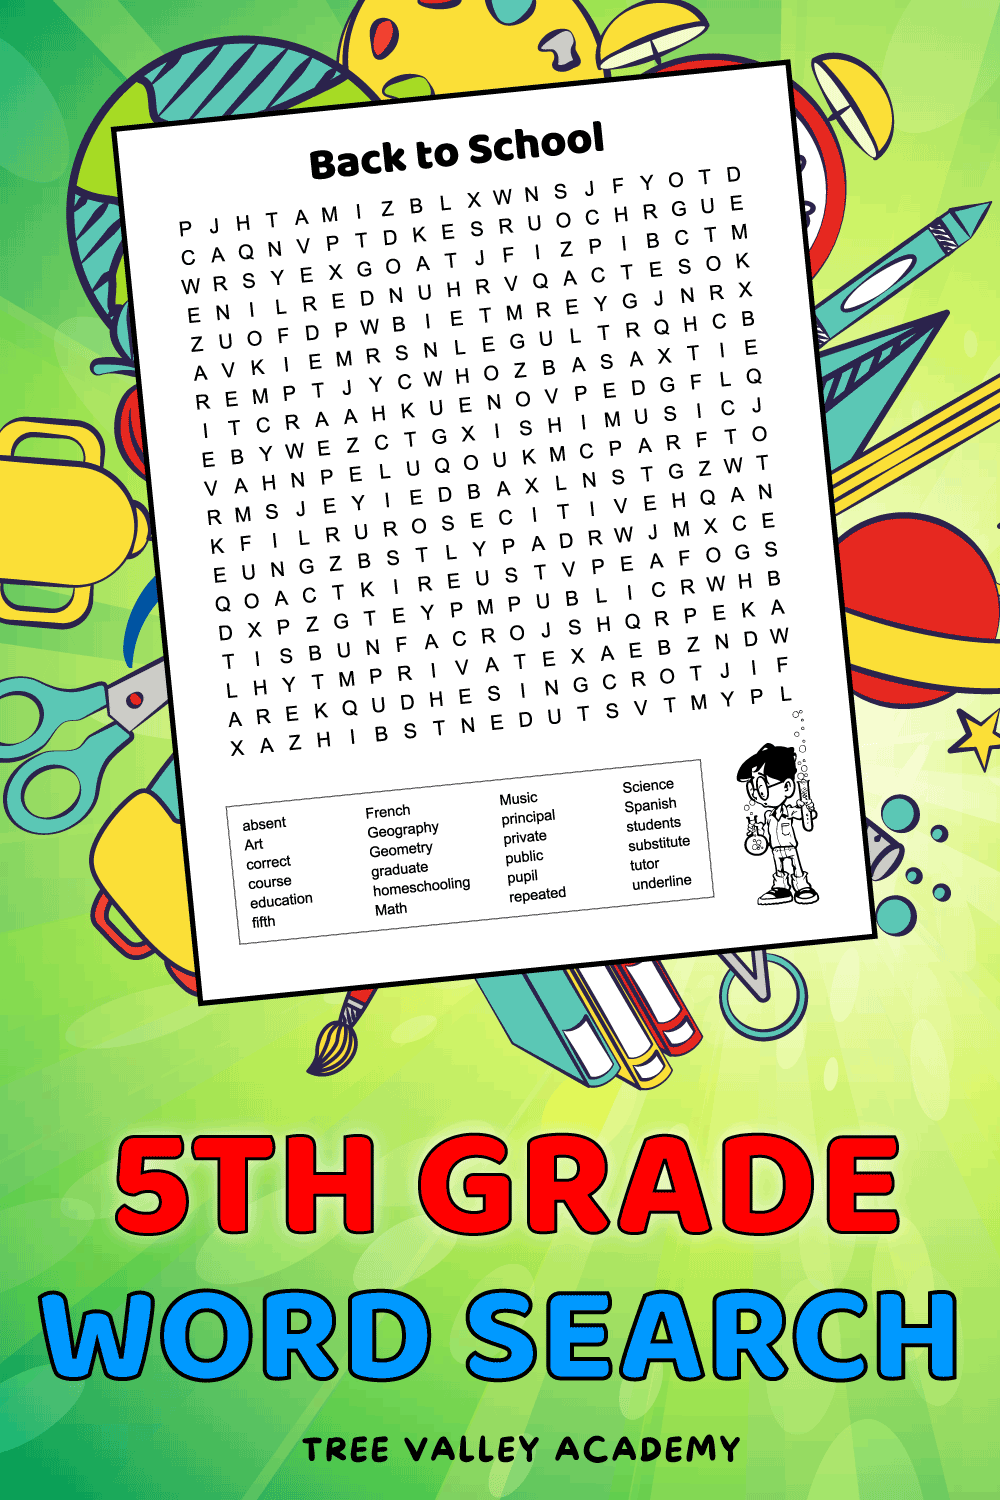 Back To School Word Search For 5th Grade Students